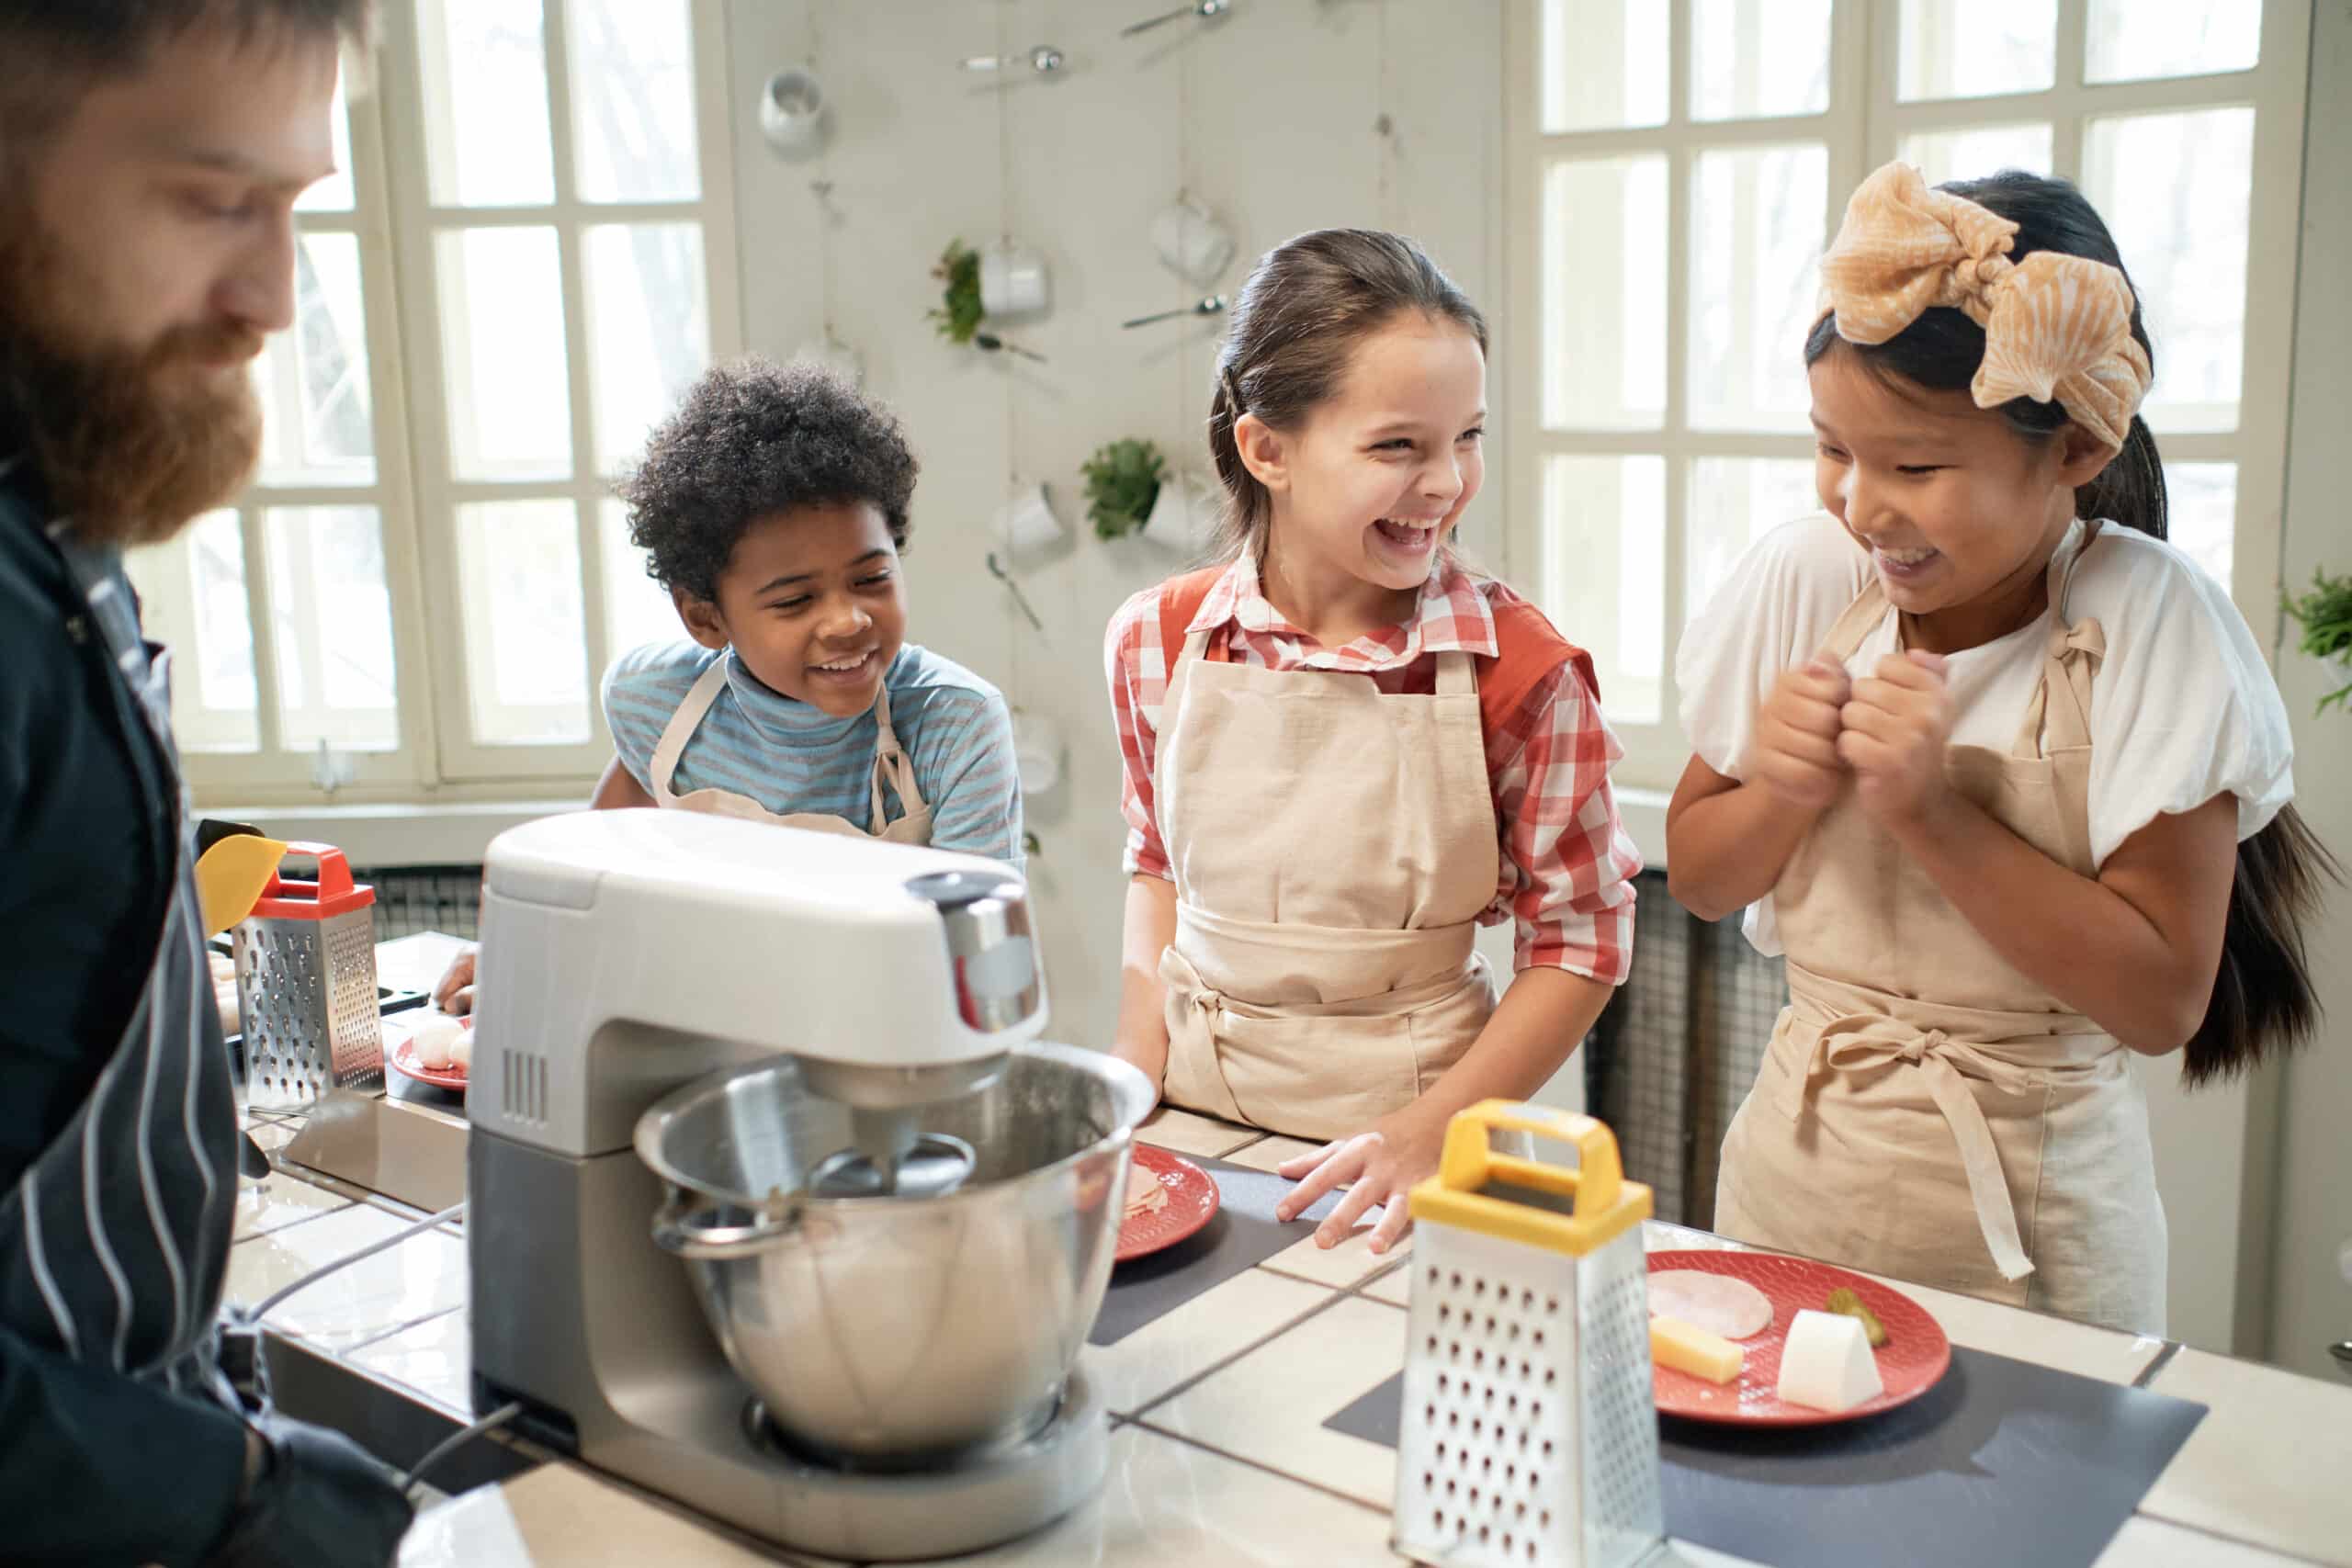 Group of happy children laughing during cooking lesson with cook in the kitchen